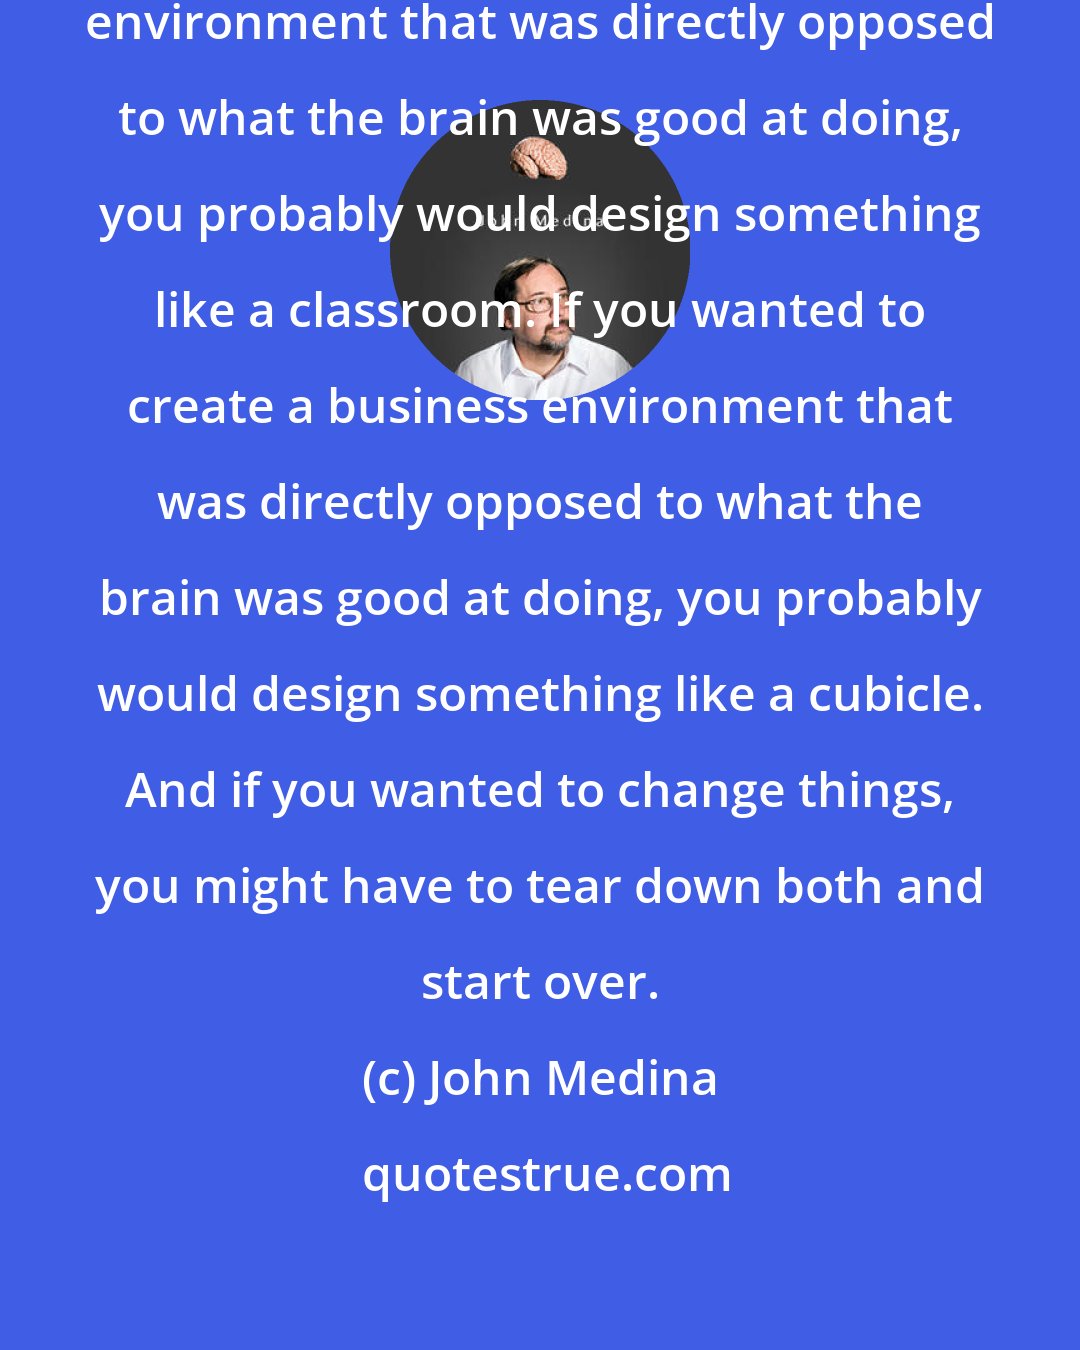 John Medina: If you wanted to create an education environment that was directly opposed to what the brain was good at doing, you probably would design something like a classroom. If you wanted to create a business environment that was directly opposed to what the brain was good at doing, you probably would design something like a cubicle. And if you wanted to change things, you might have to tear down both and start over.